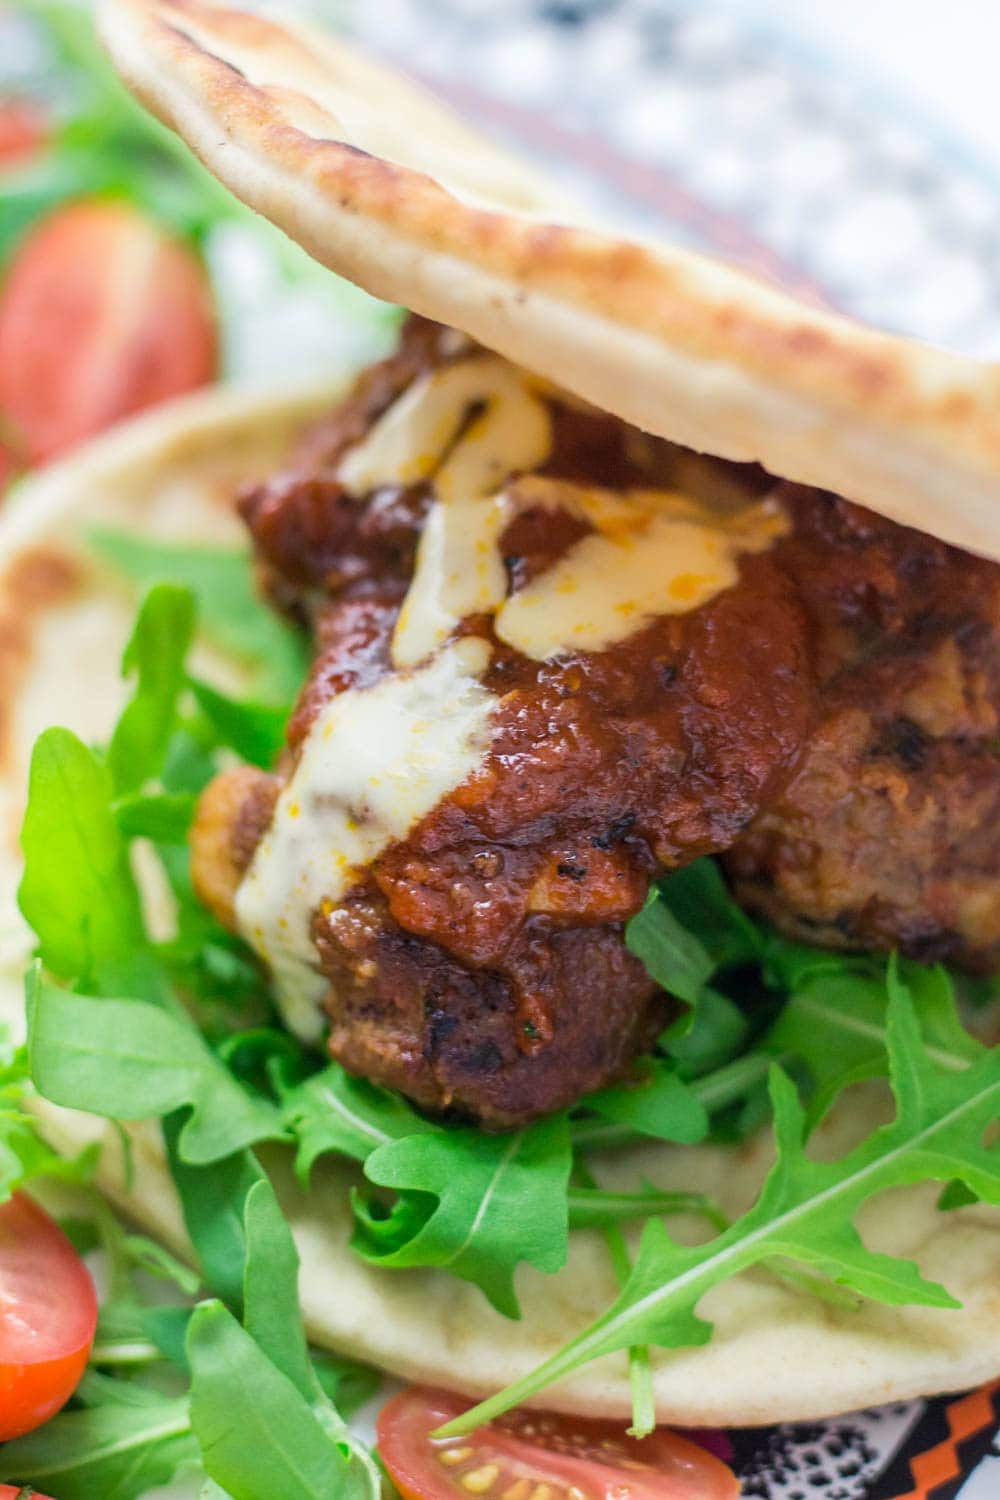 These Moroccan meatball flatbreads are surprisingly quick to make. The meatballs are simmered in a harissa tomato sauce and served with a drizzle of aioli.